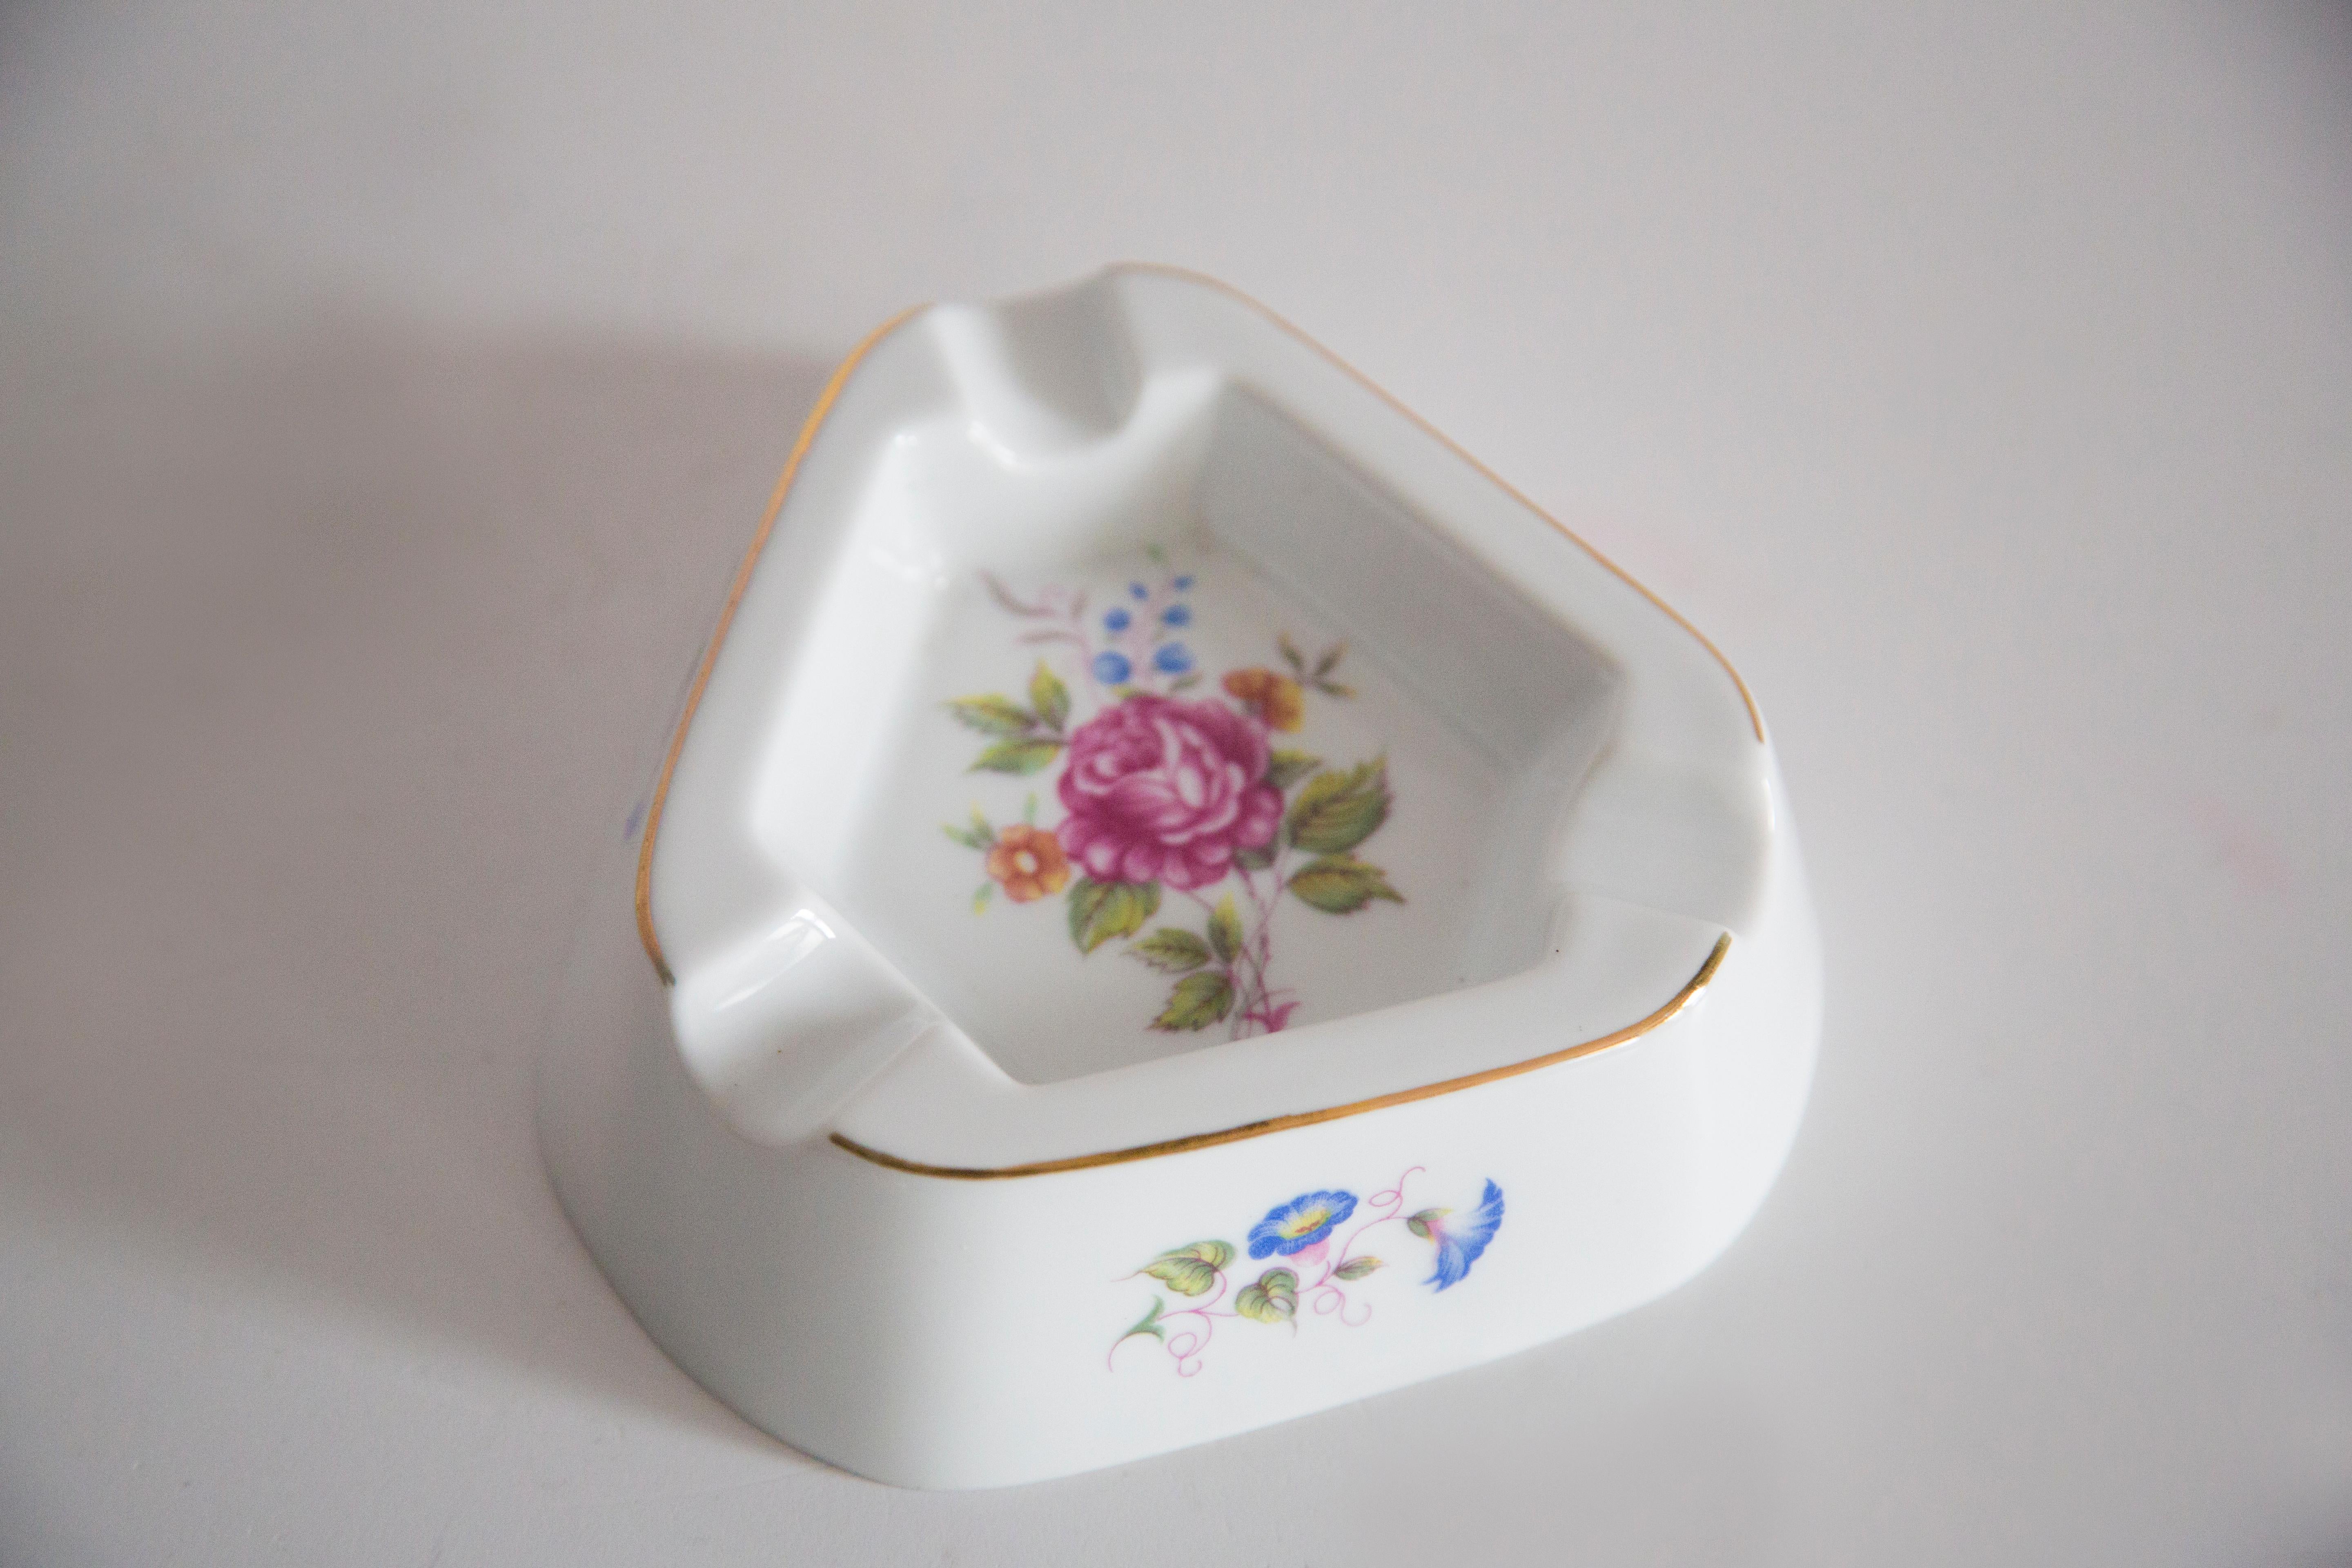 This original vintage porcelain ash tray
This item is a wonderful addition to every home. 
These item remain in a very good vintage condition. 
Dimensions: 10x4cm
Condition: This item is in a very good vintage condition.
Only one unique item.